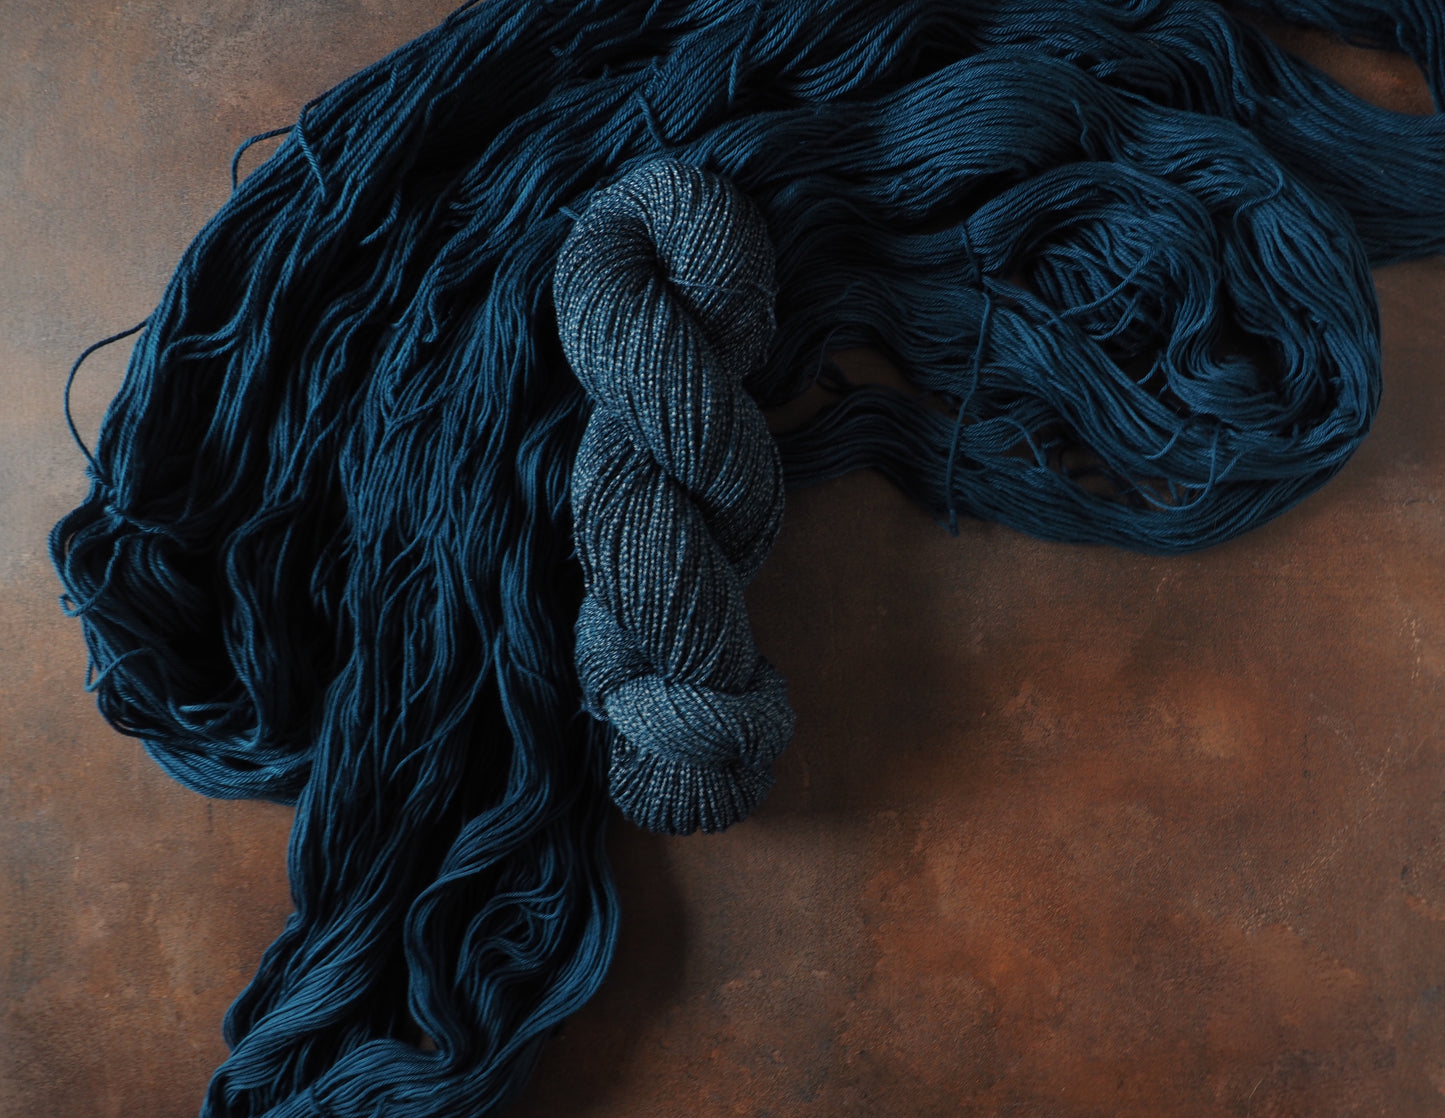 Nightfall - Dyed to Order *Please allow 8 weeks for dyeing*